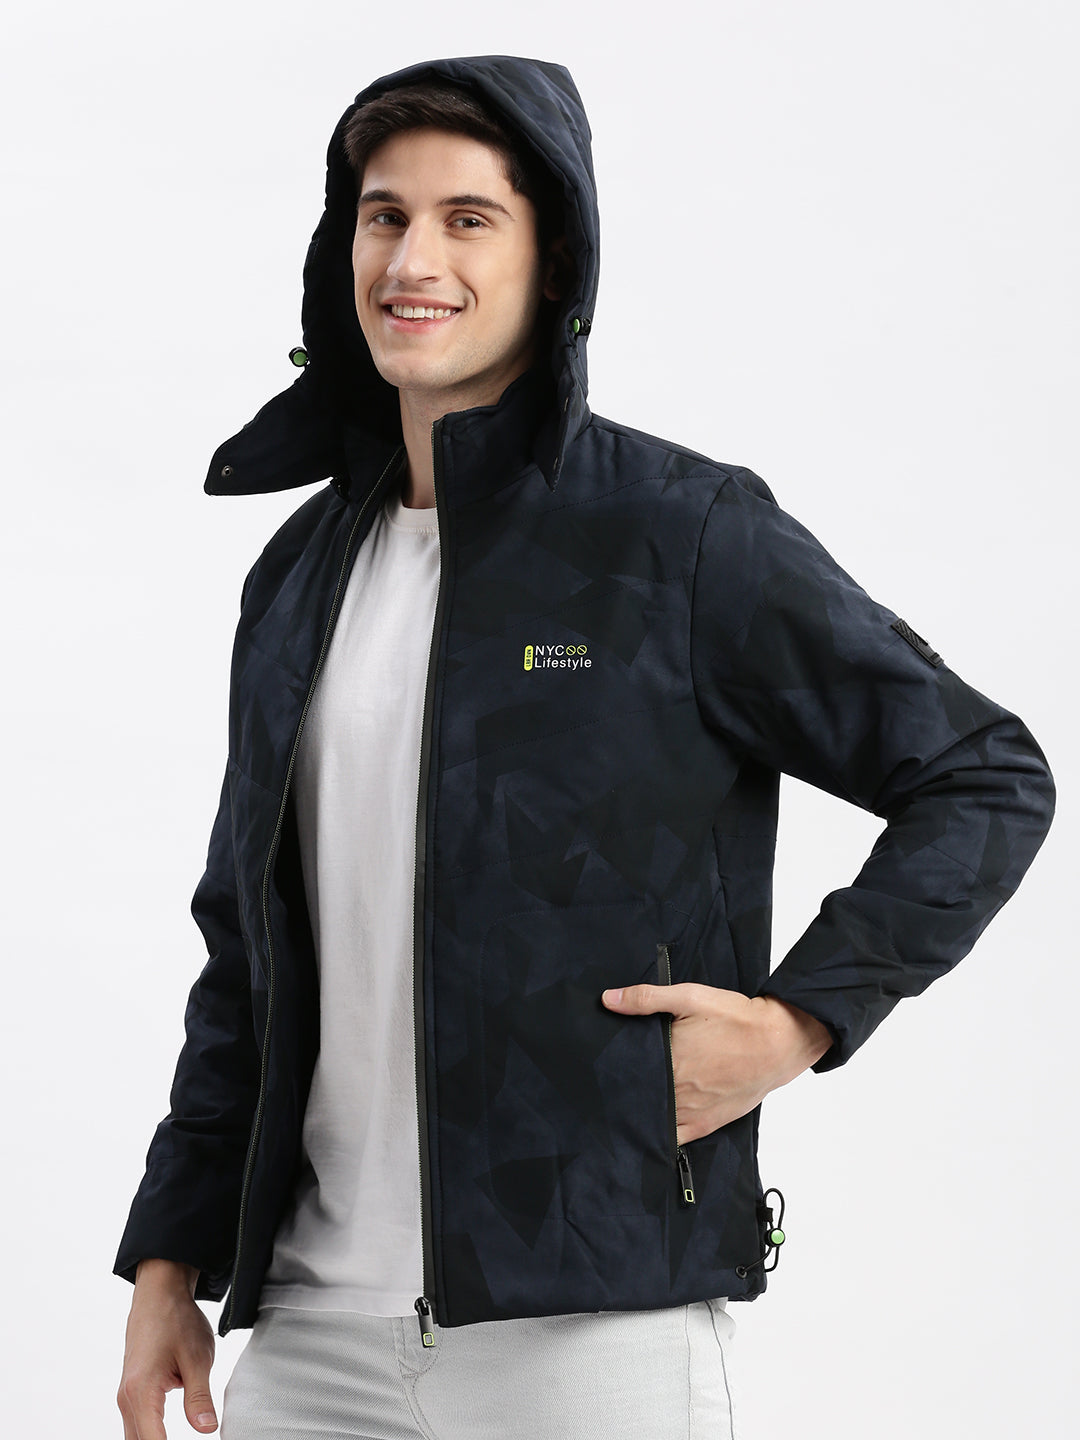 Men Abstract Mock Collar Navy Blue Puffer Jacket Comes with Detachable Hoodie